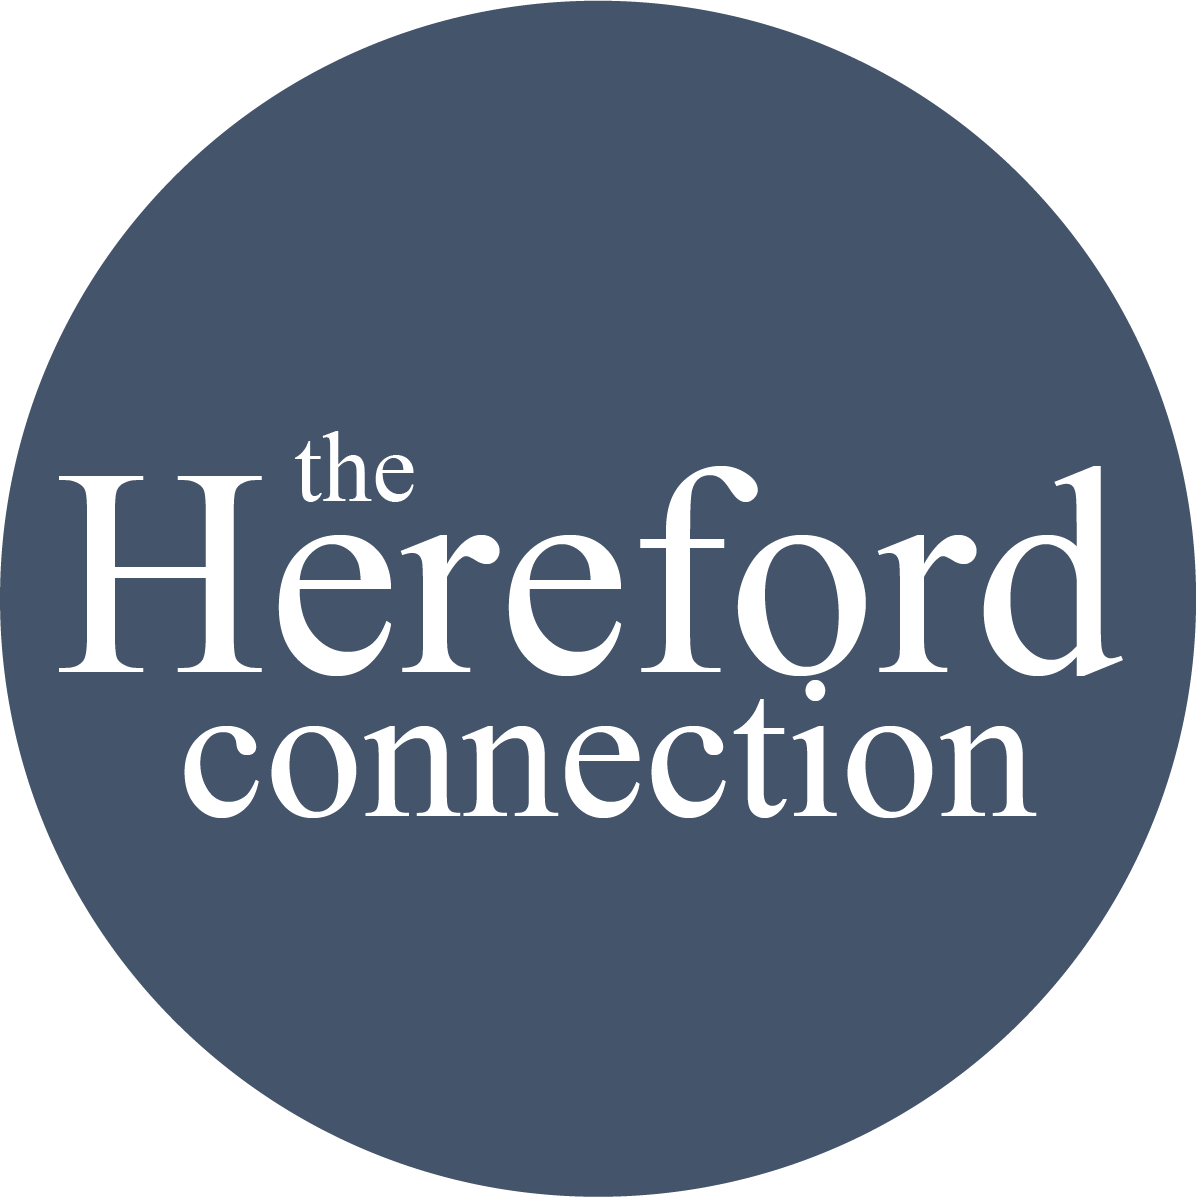 The Hereford Connection logo in white and in blue circle